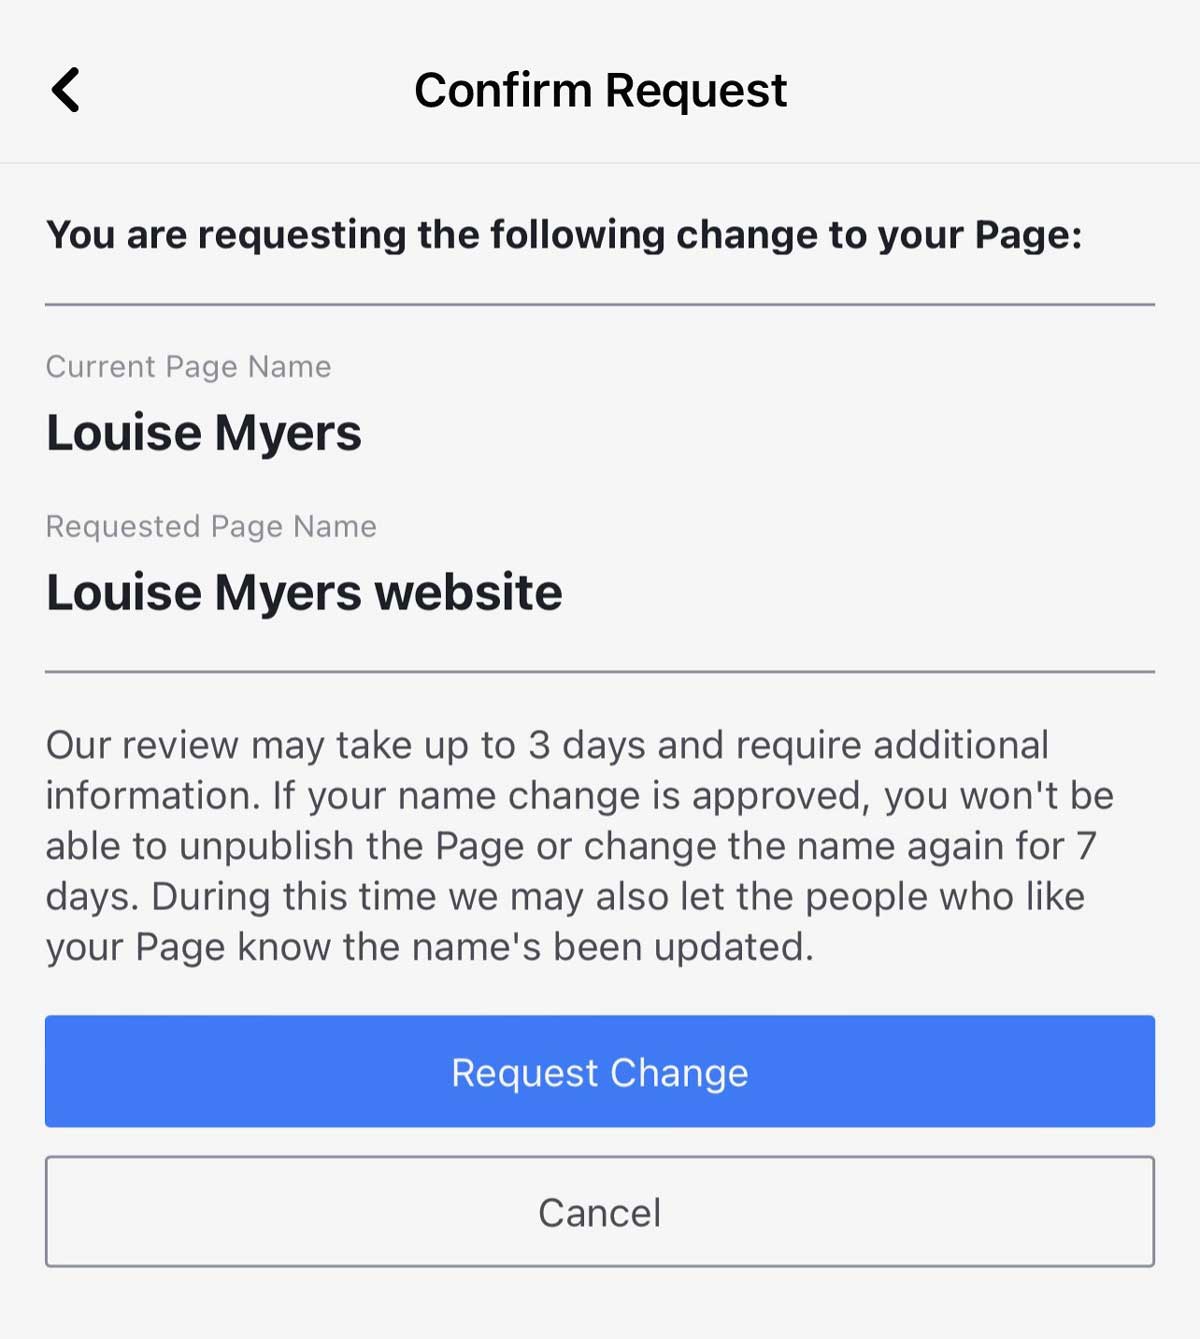 where to inspection your request and confirm Facebook page list deepen in fluid app.